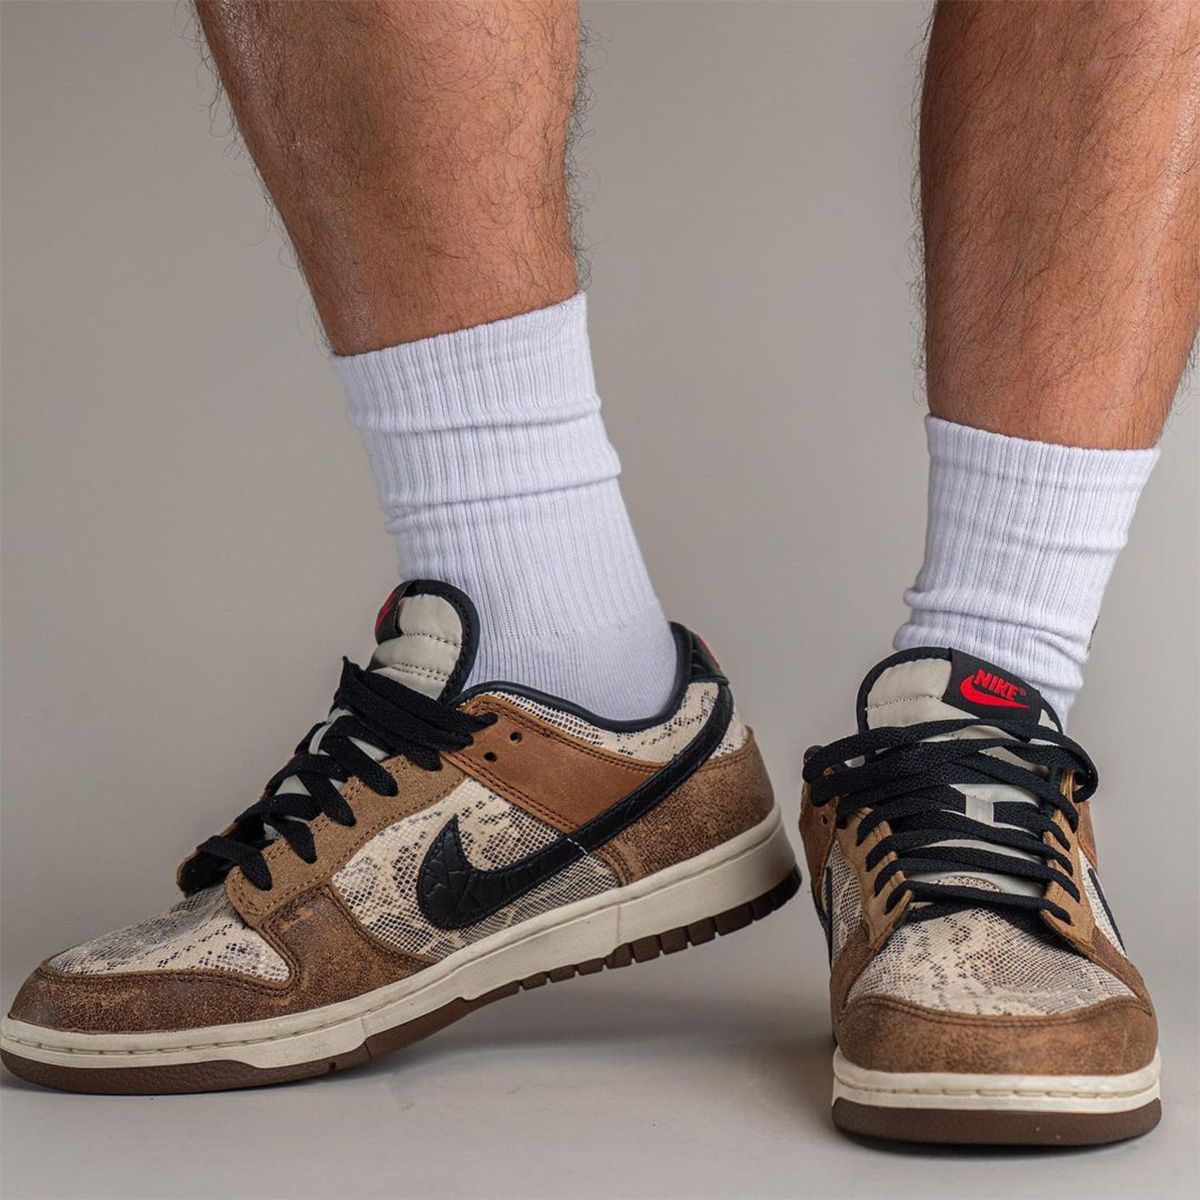 The Nike Dunk Low CO.JP 